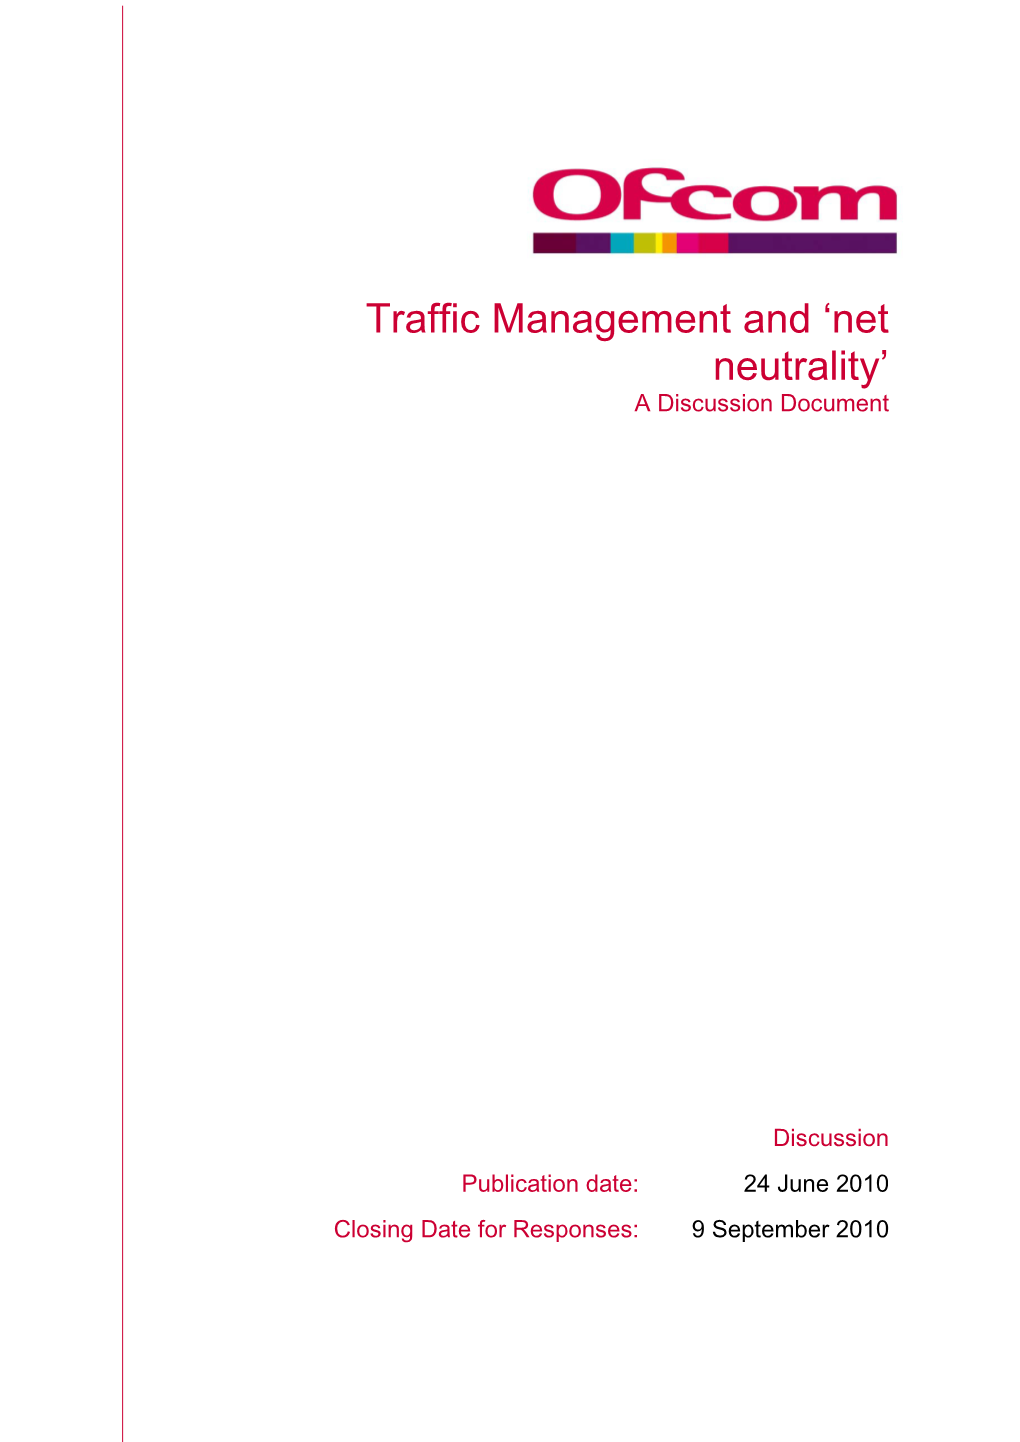 Traffic Management and 'Net Neutrality'